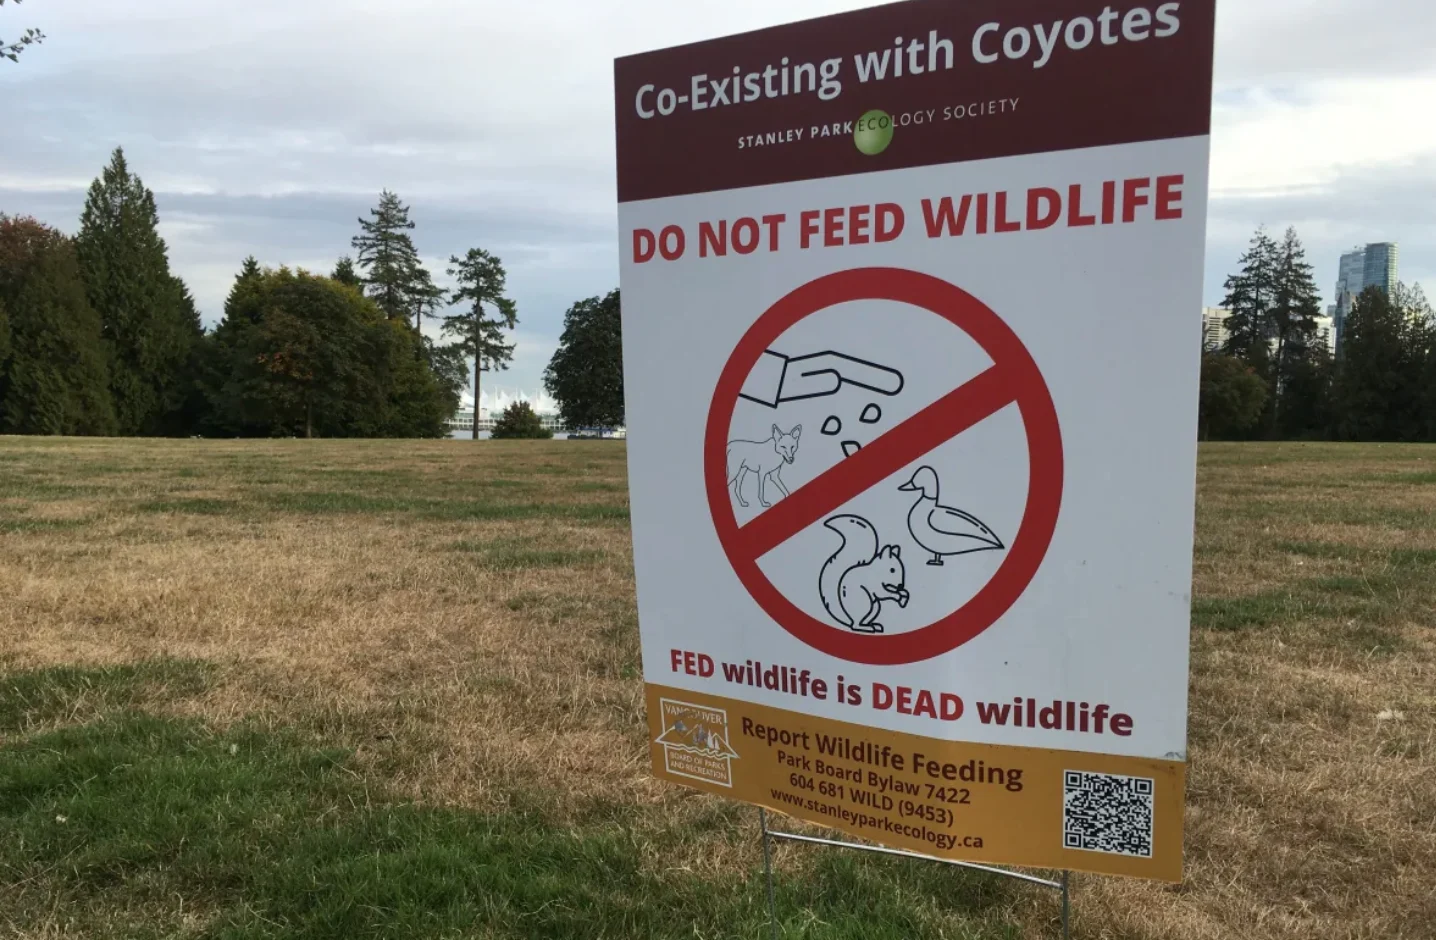 CBC: Don't feed wildlife. A sign near Brockton Oval in Vancouver's Stanley Park advising people not to feed wild animals in the area. (Chad Pawson/CBC News)